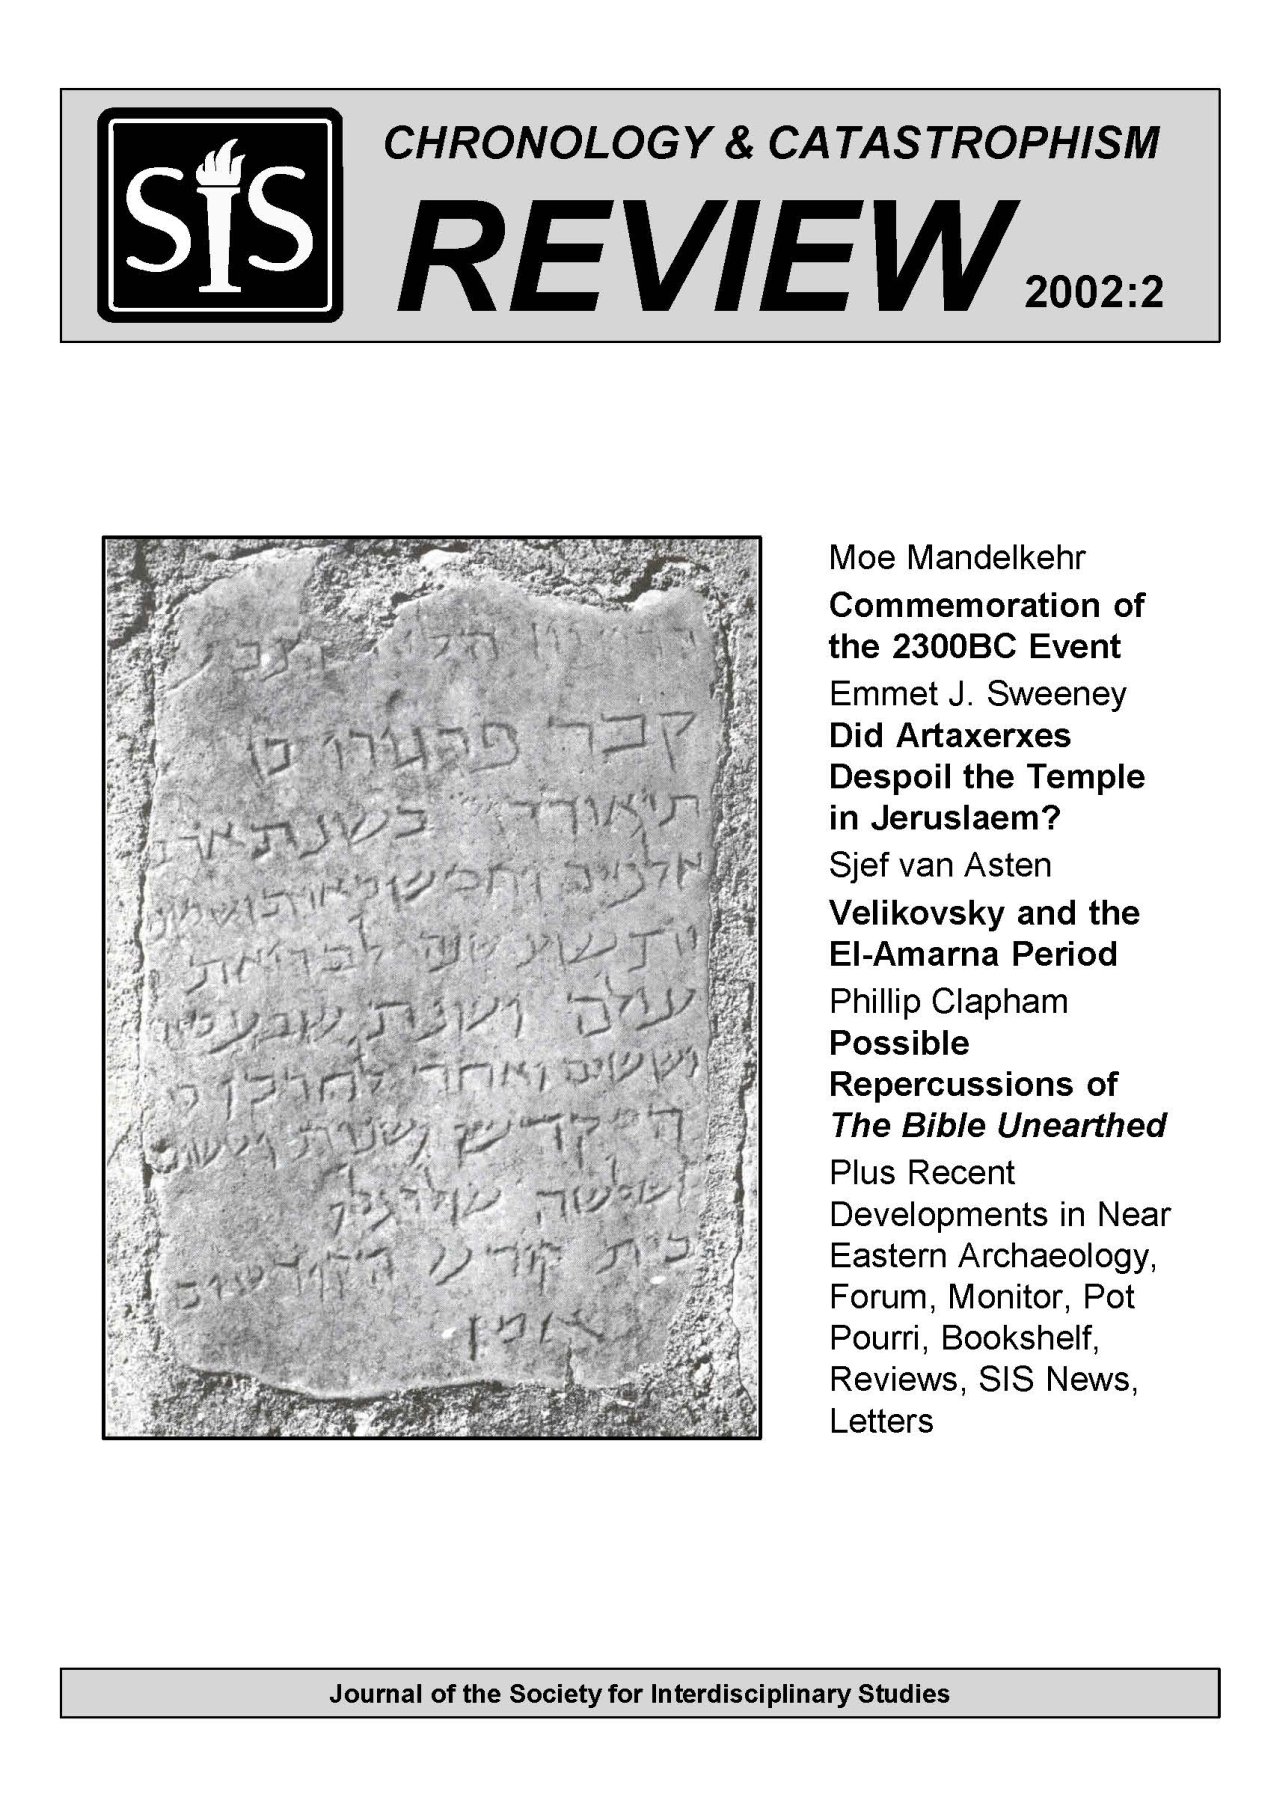 SIS Review 2002-2 cover